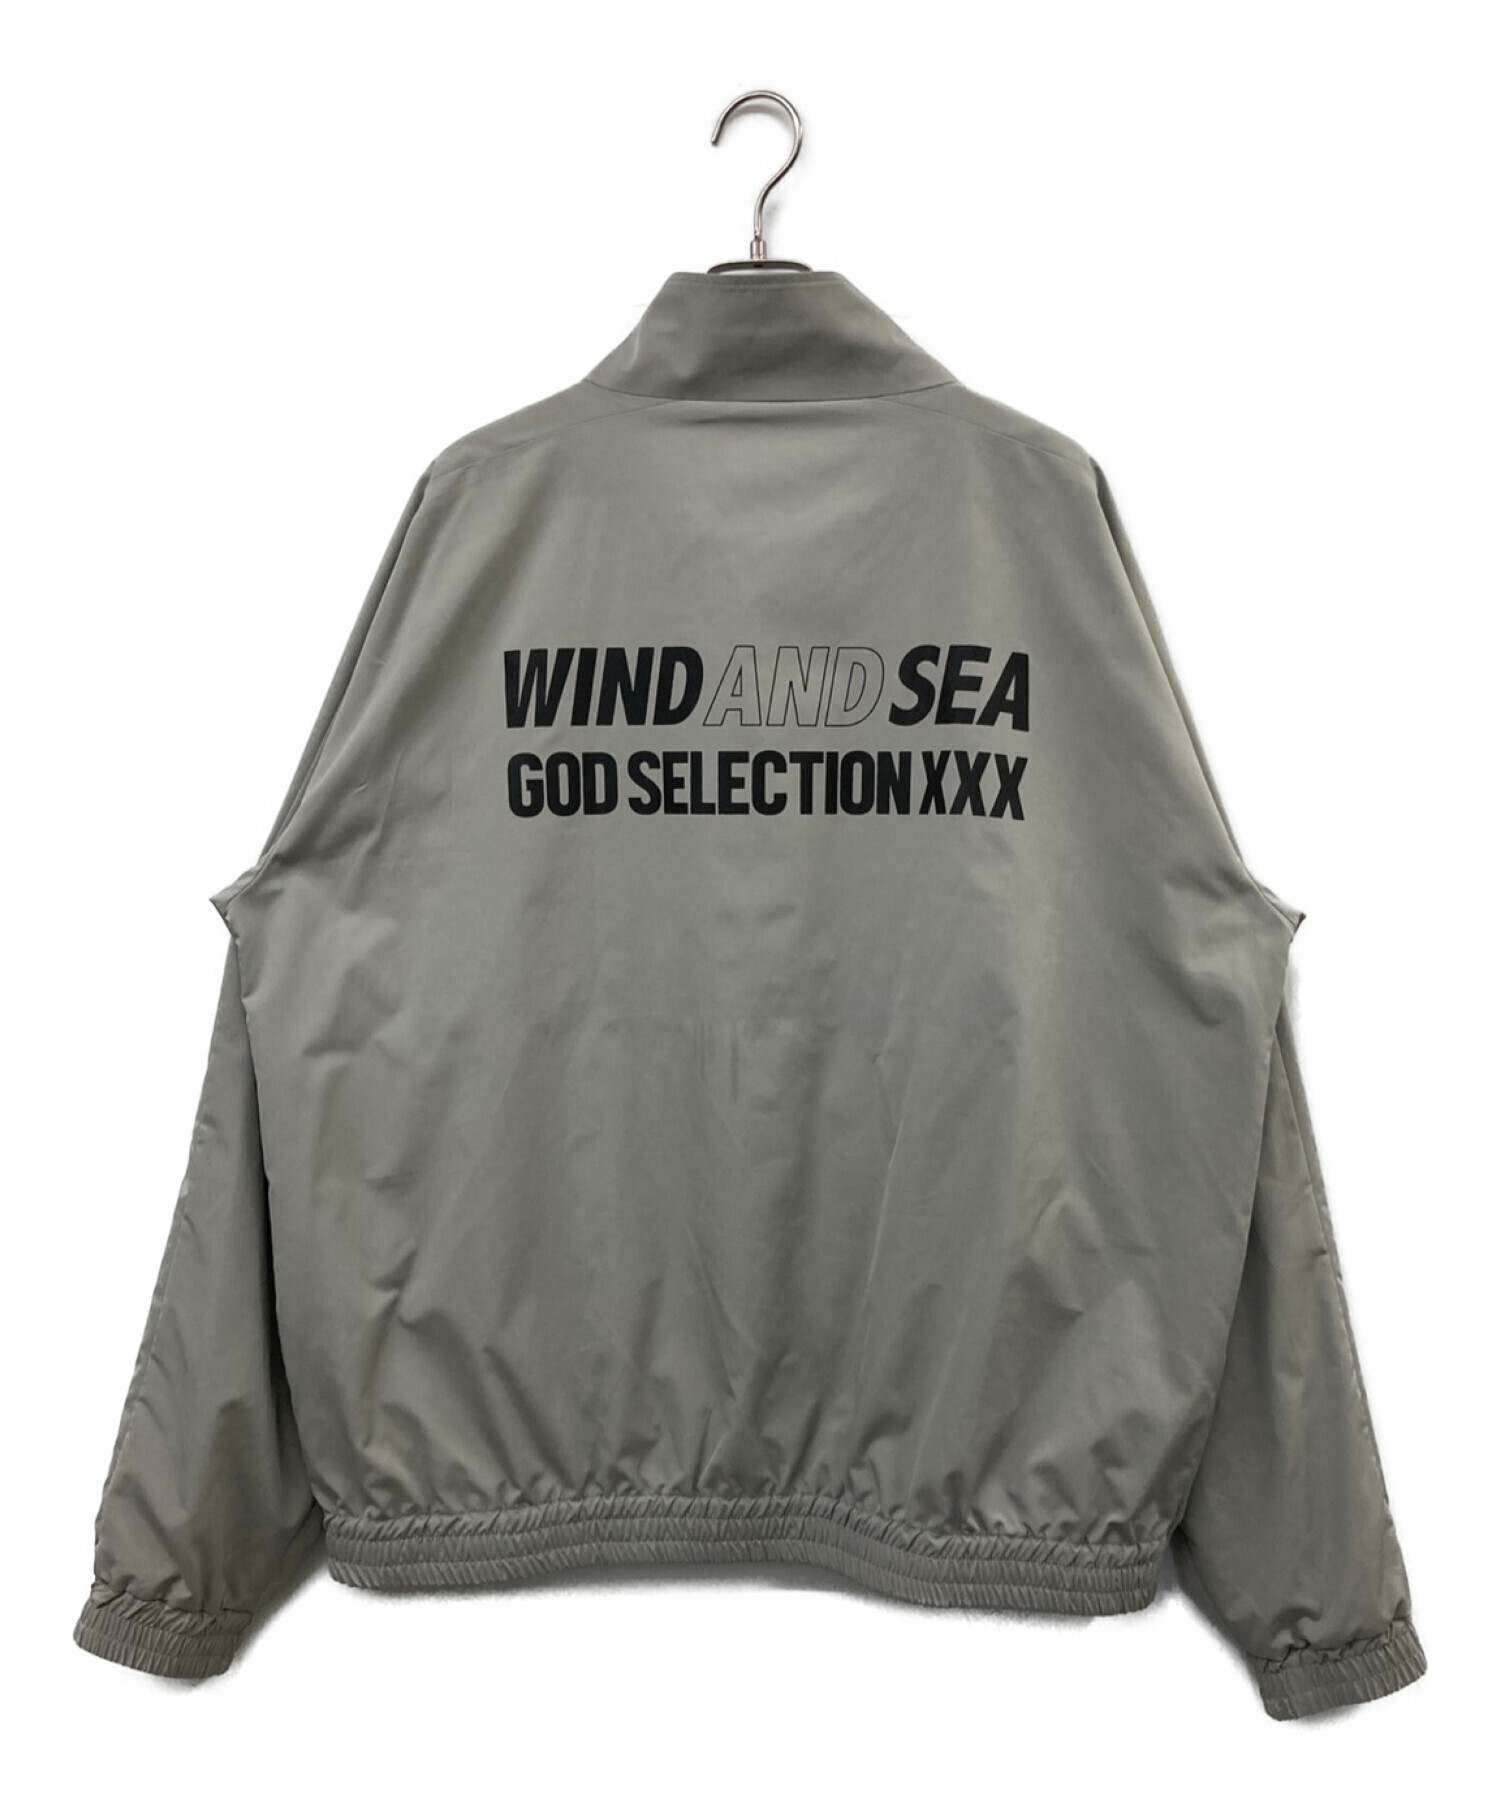 WIND AND SEA GOD SELECTION XXX ナイロンパーカー袖丈67cm ...